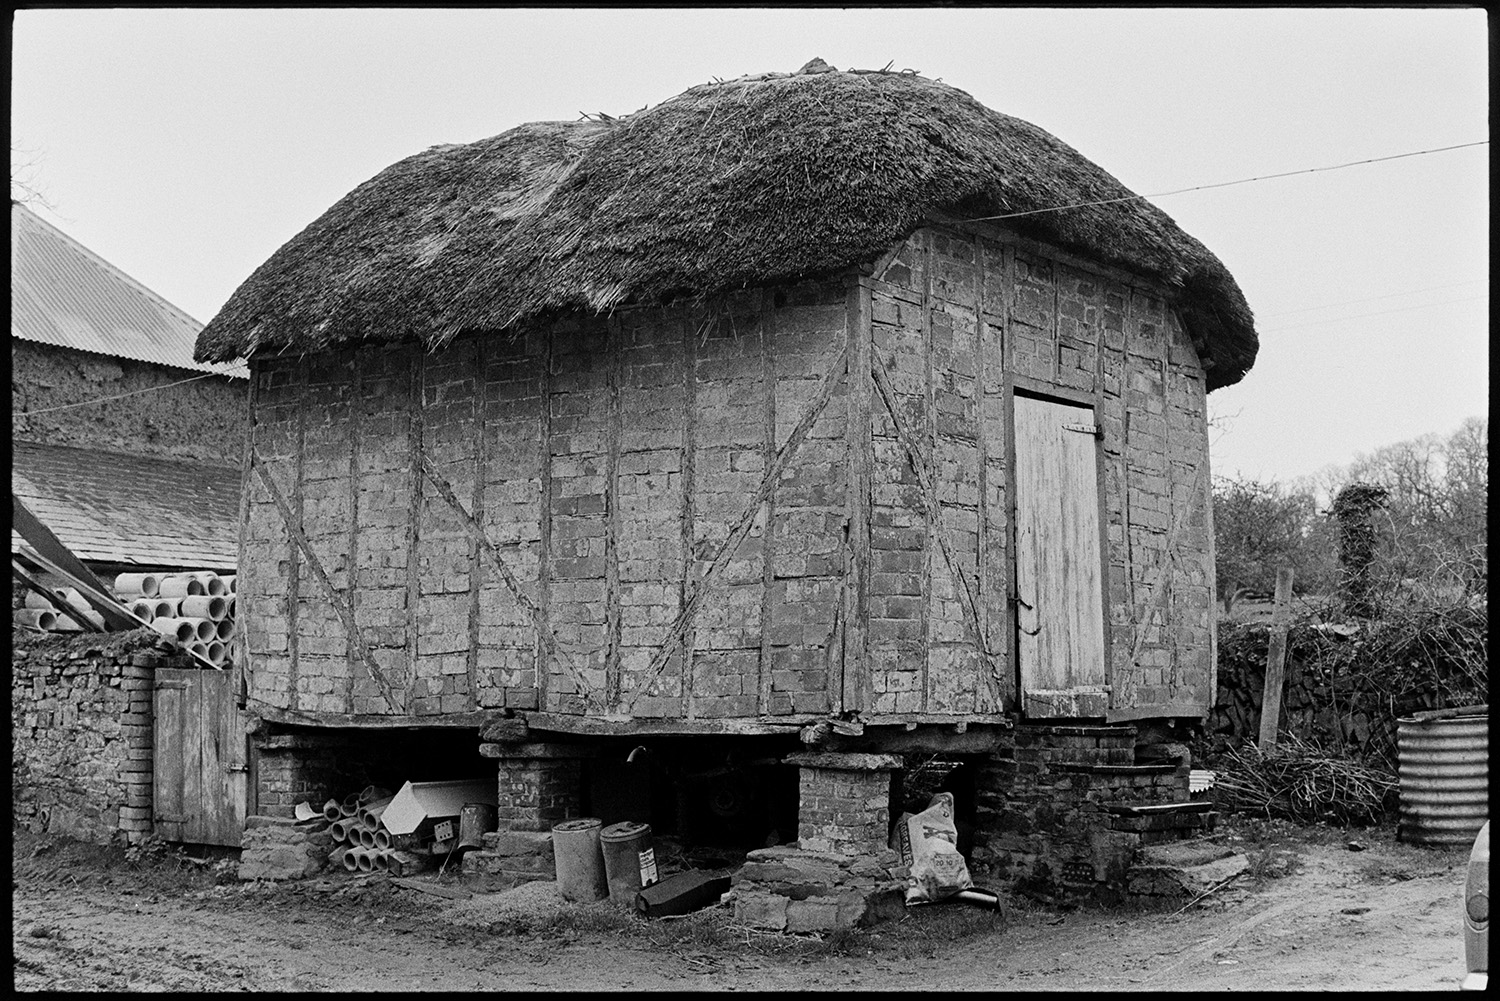 Thatched granary barn on pillars. 
[A thatched granary barn on brick stilt or pillars in the farmyard at Higher House Farm, Atherington. Steps lead up to the wooden door and wooden beams can be seen in the walls.]